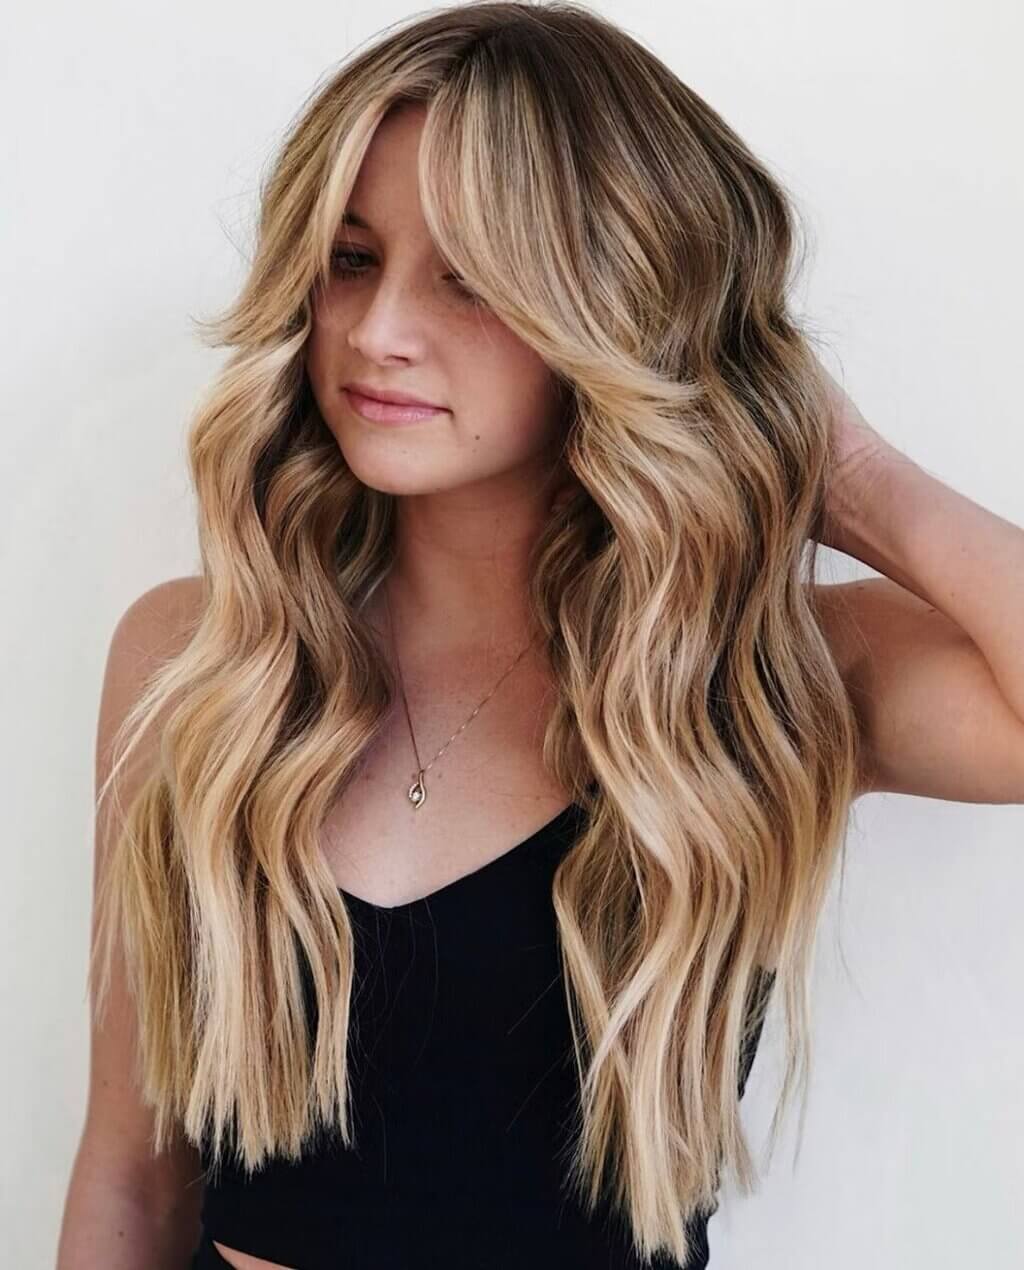 How to style wavy long hair with curtain bangs?